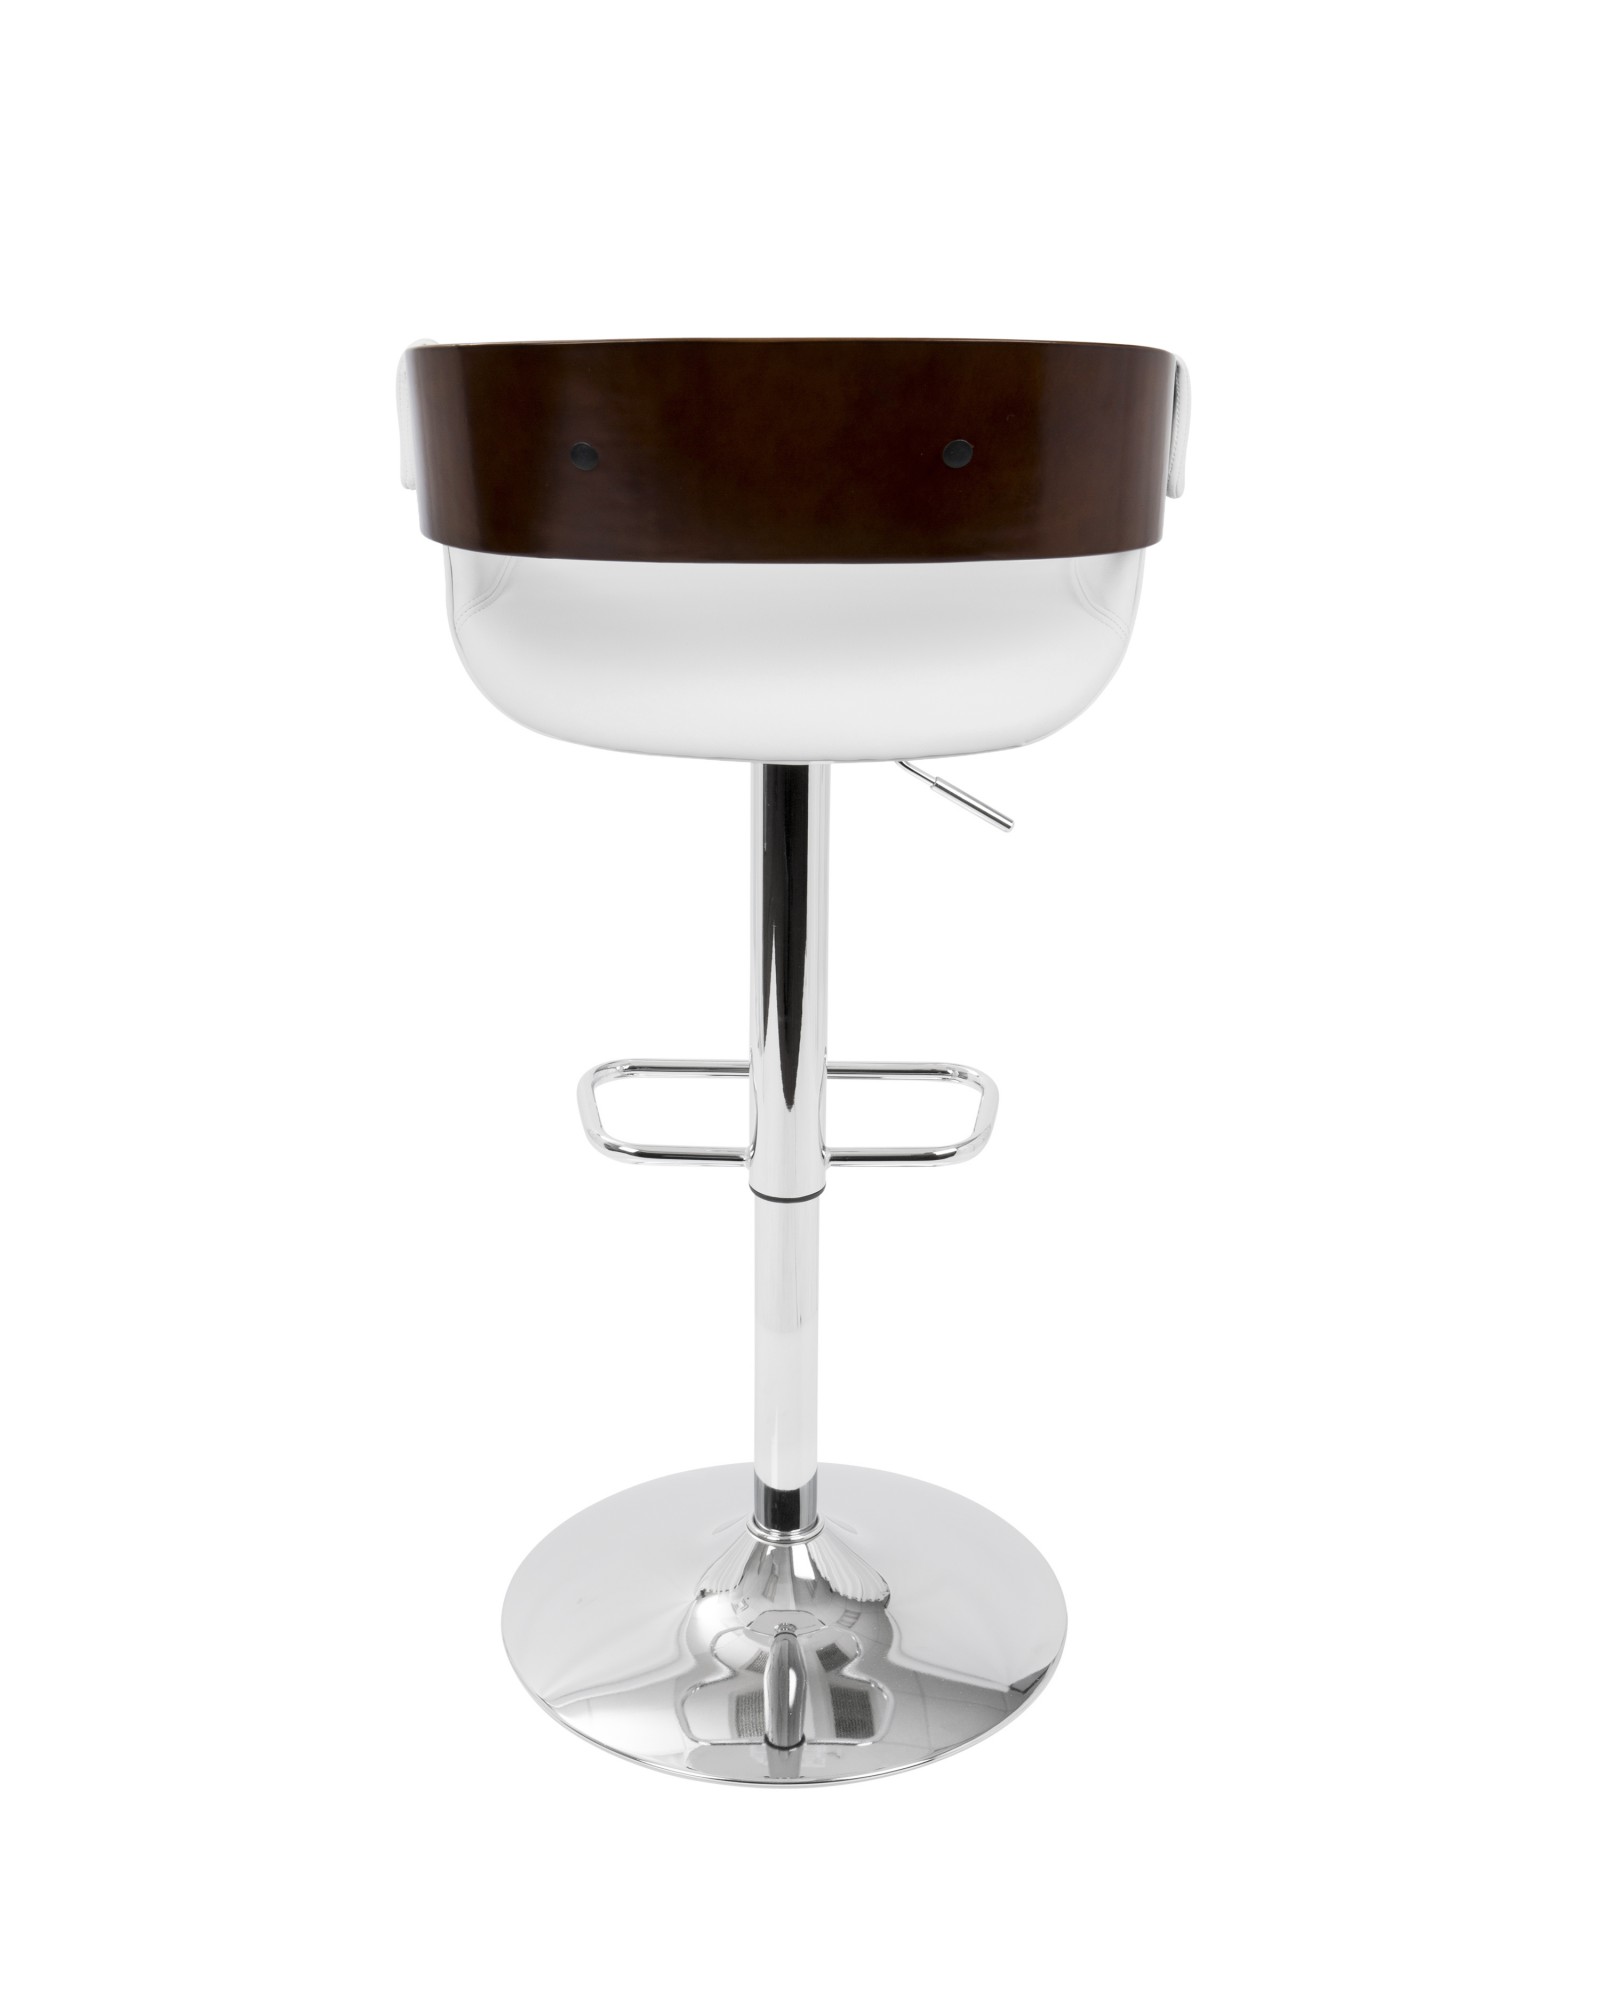 Envi Mid-Century Modern Adjustable Barstool in Cherry and White